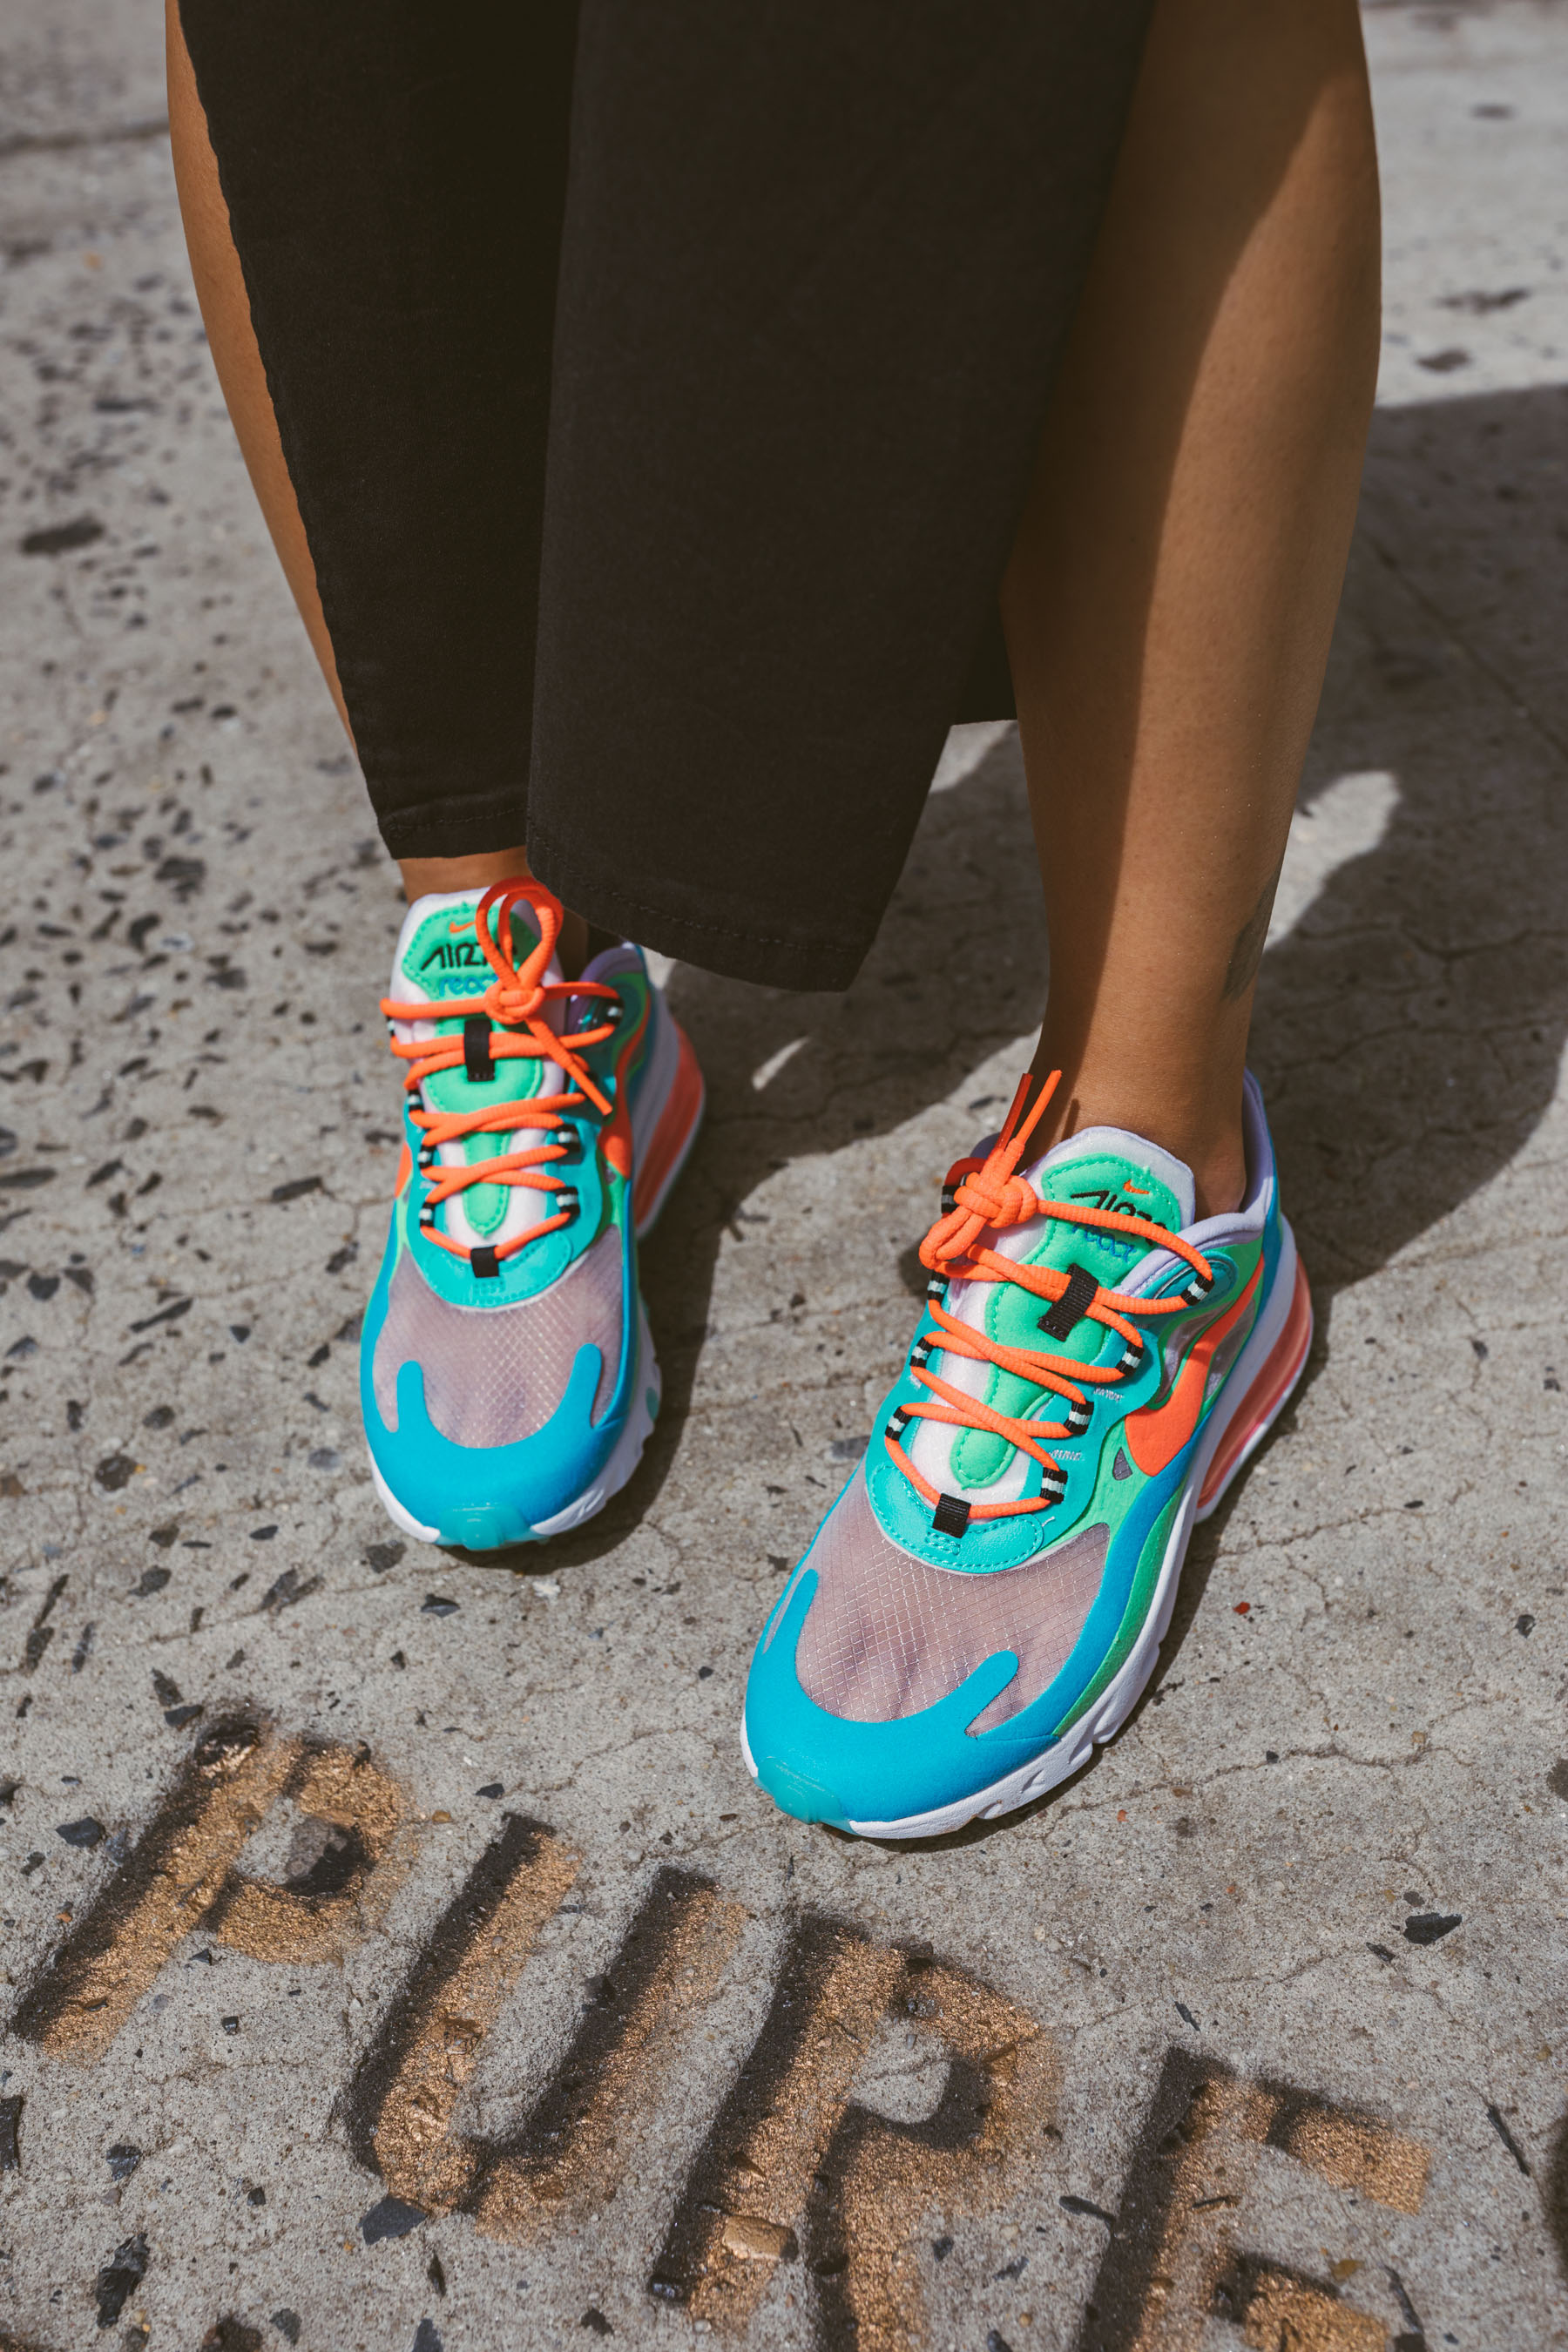 best fashion sneakers for fall, Nike React 270’s Women’s Psychedelic Colorway, Nike React 270 sneakers, bold sneakers // Notjessfashion.com